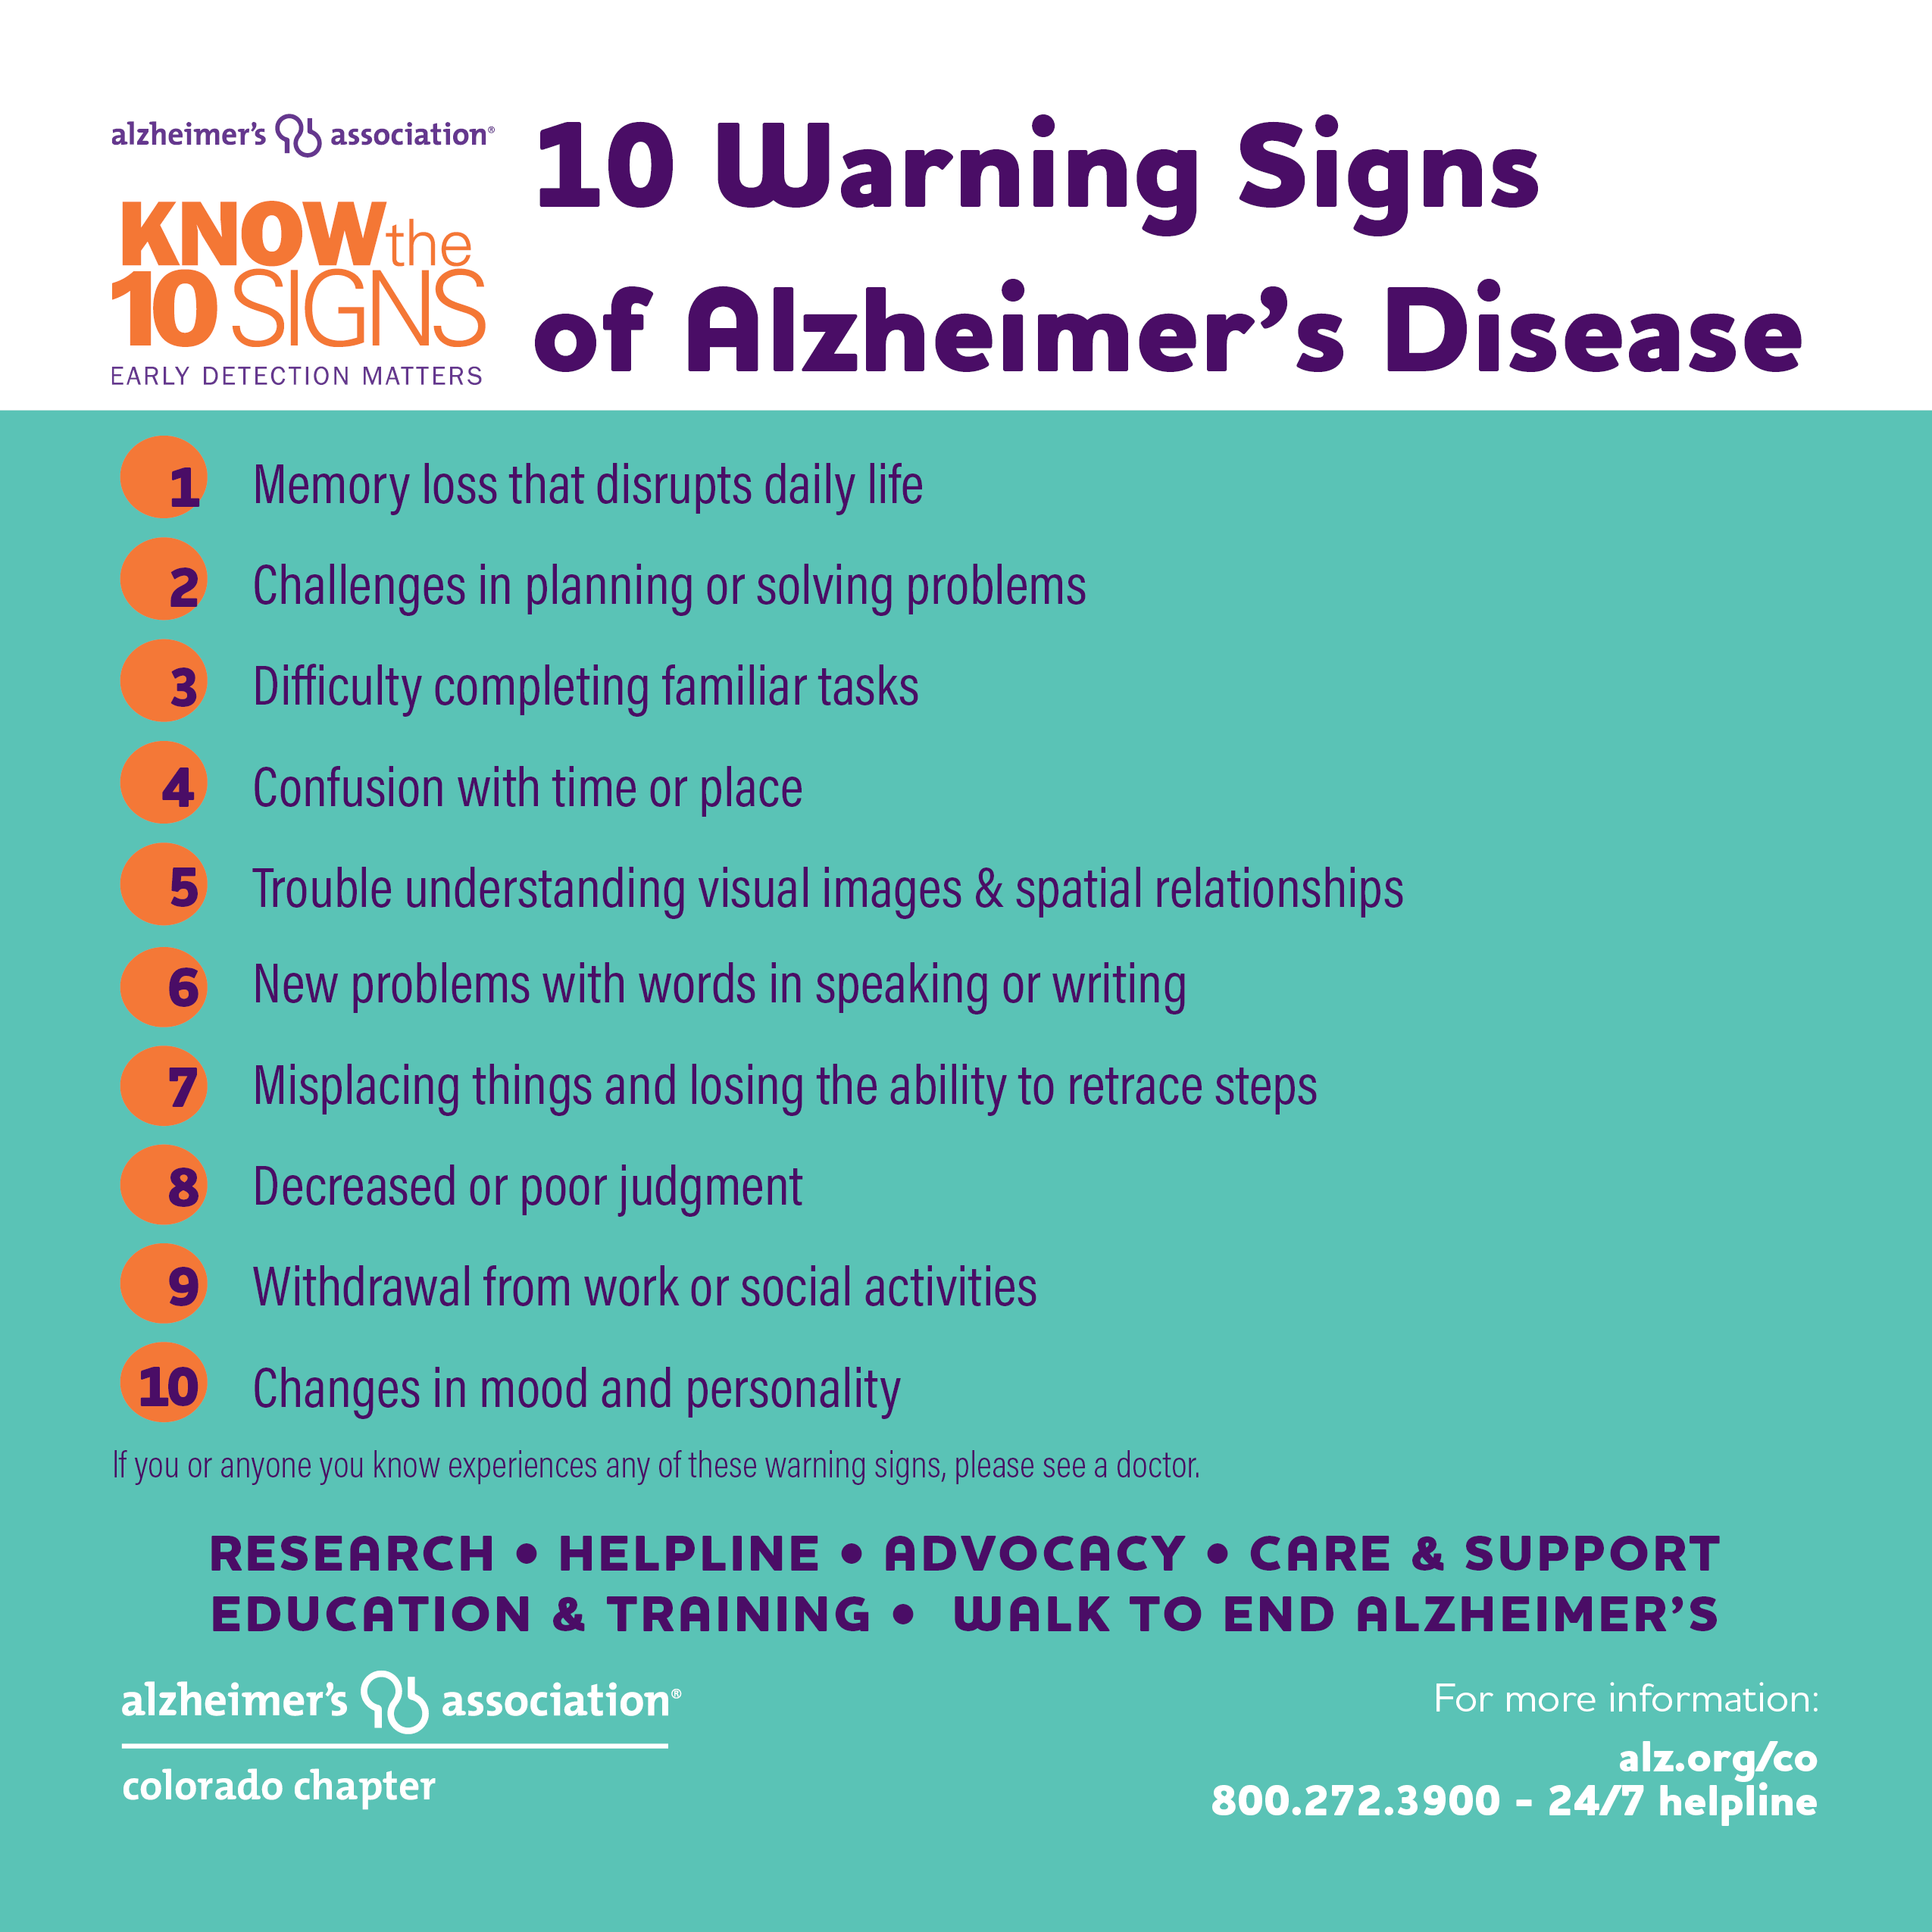 Pin on Know the 10 Warning Signs